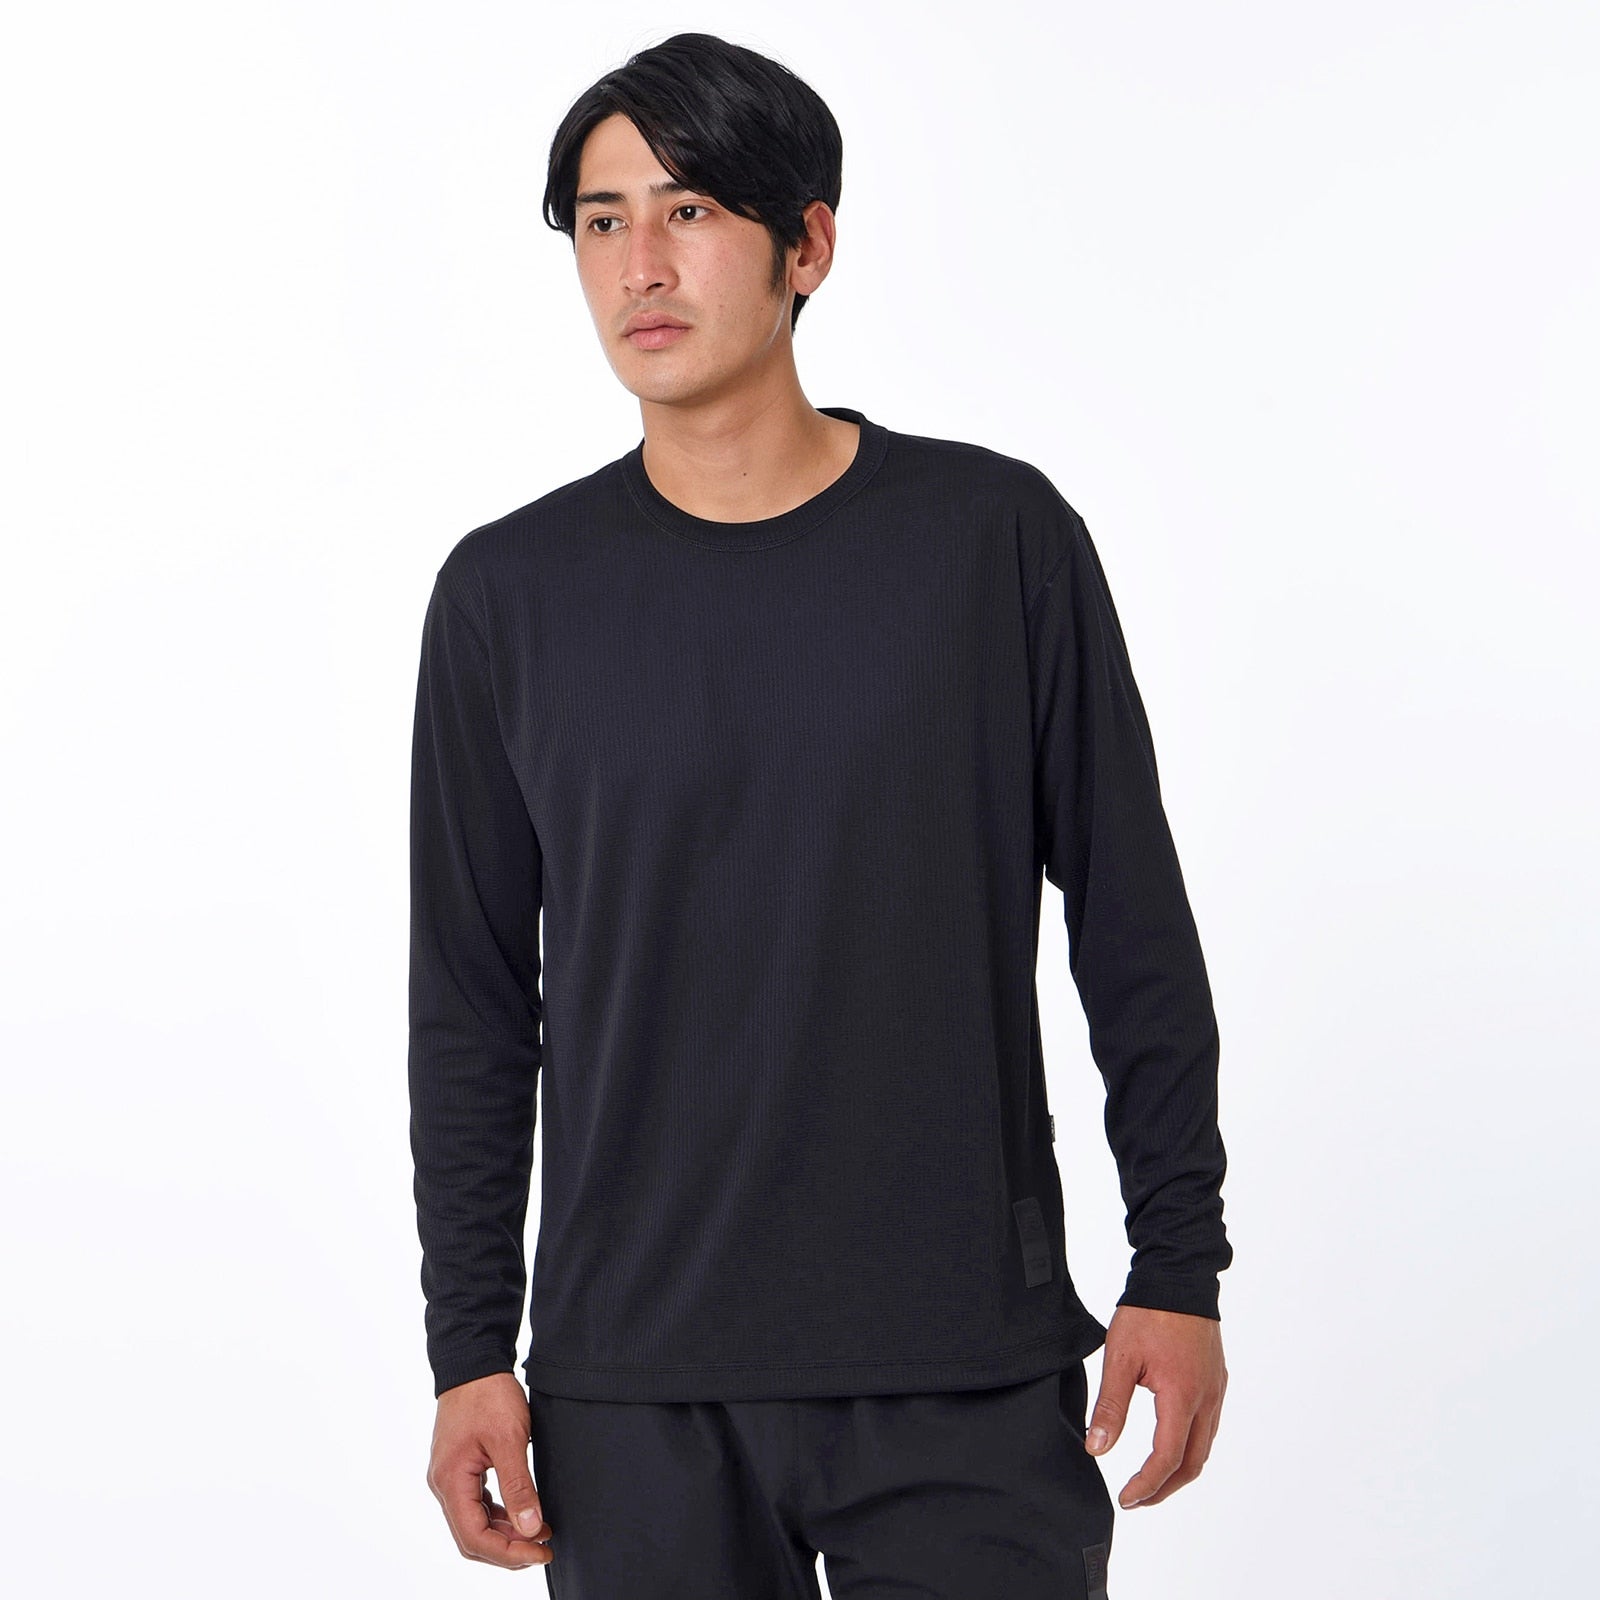 Black Out Collection プレミアコレクションTシャツ　ロングスリーブ